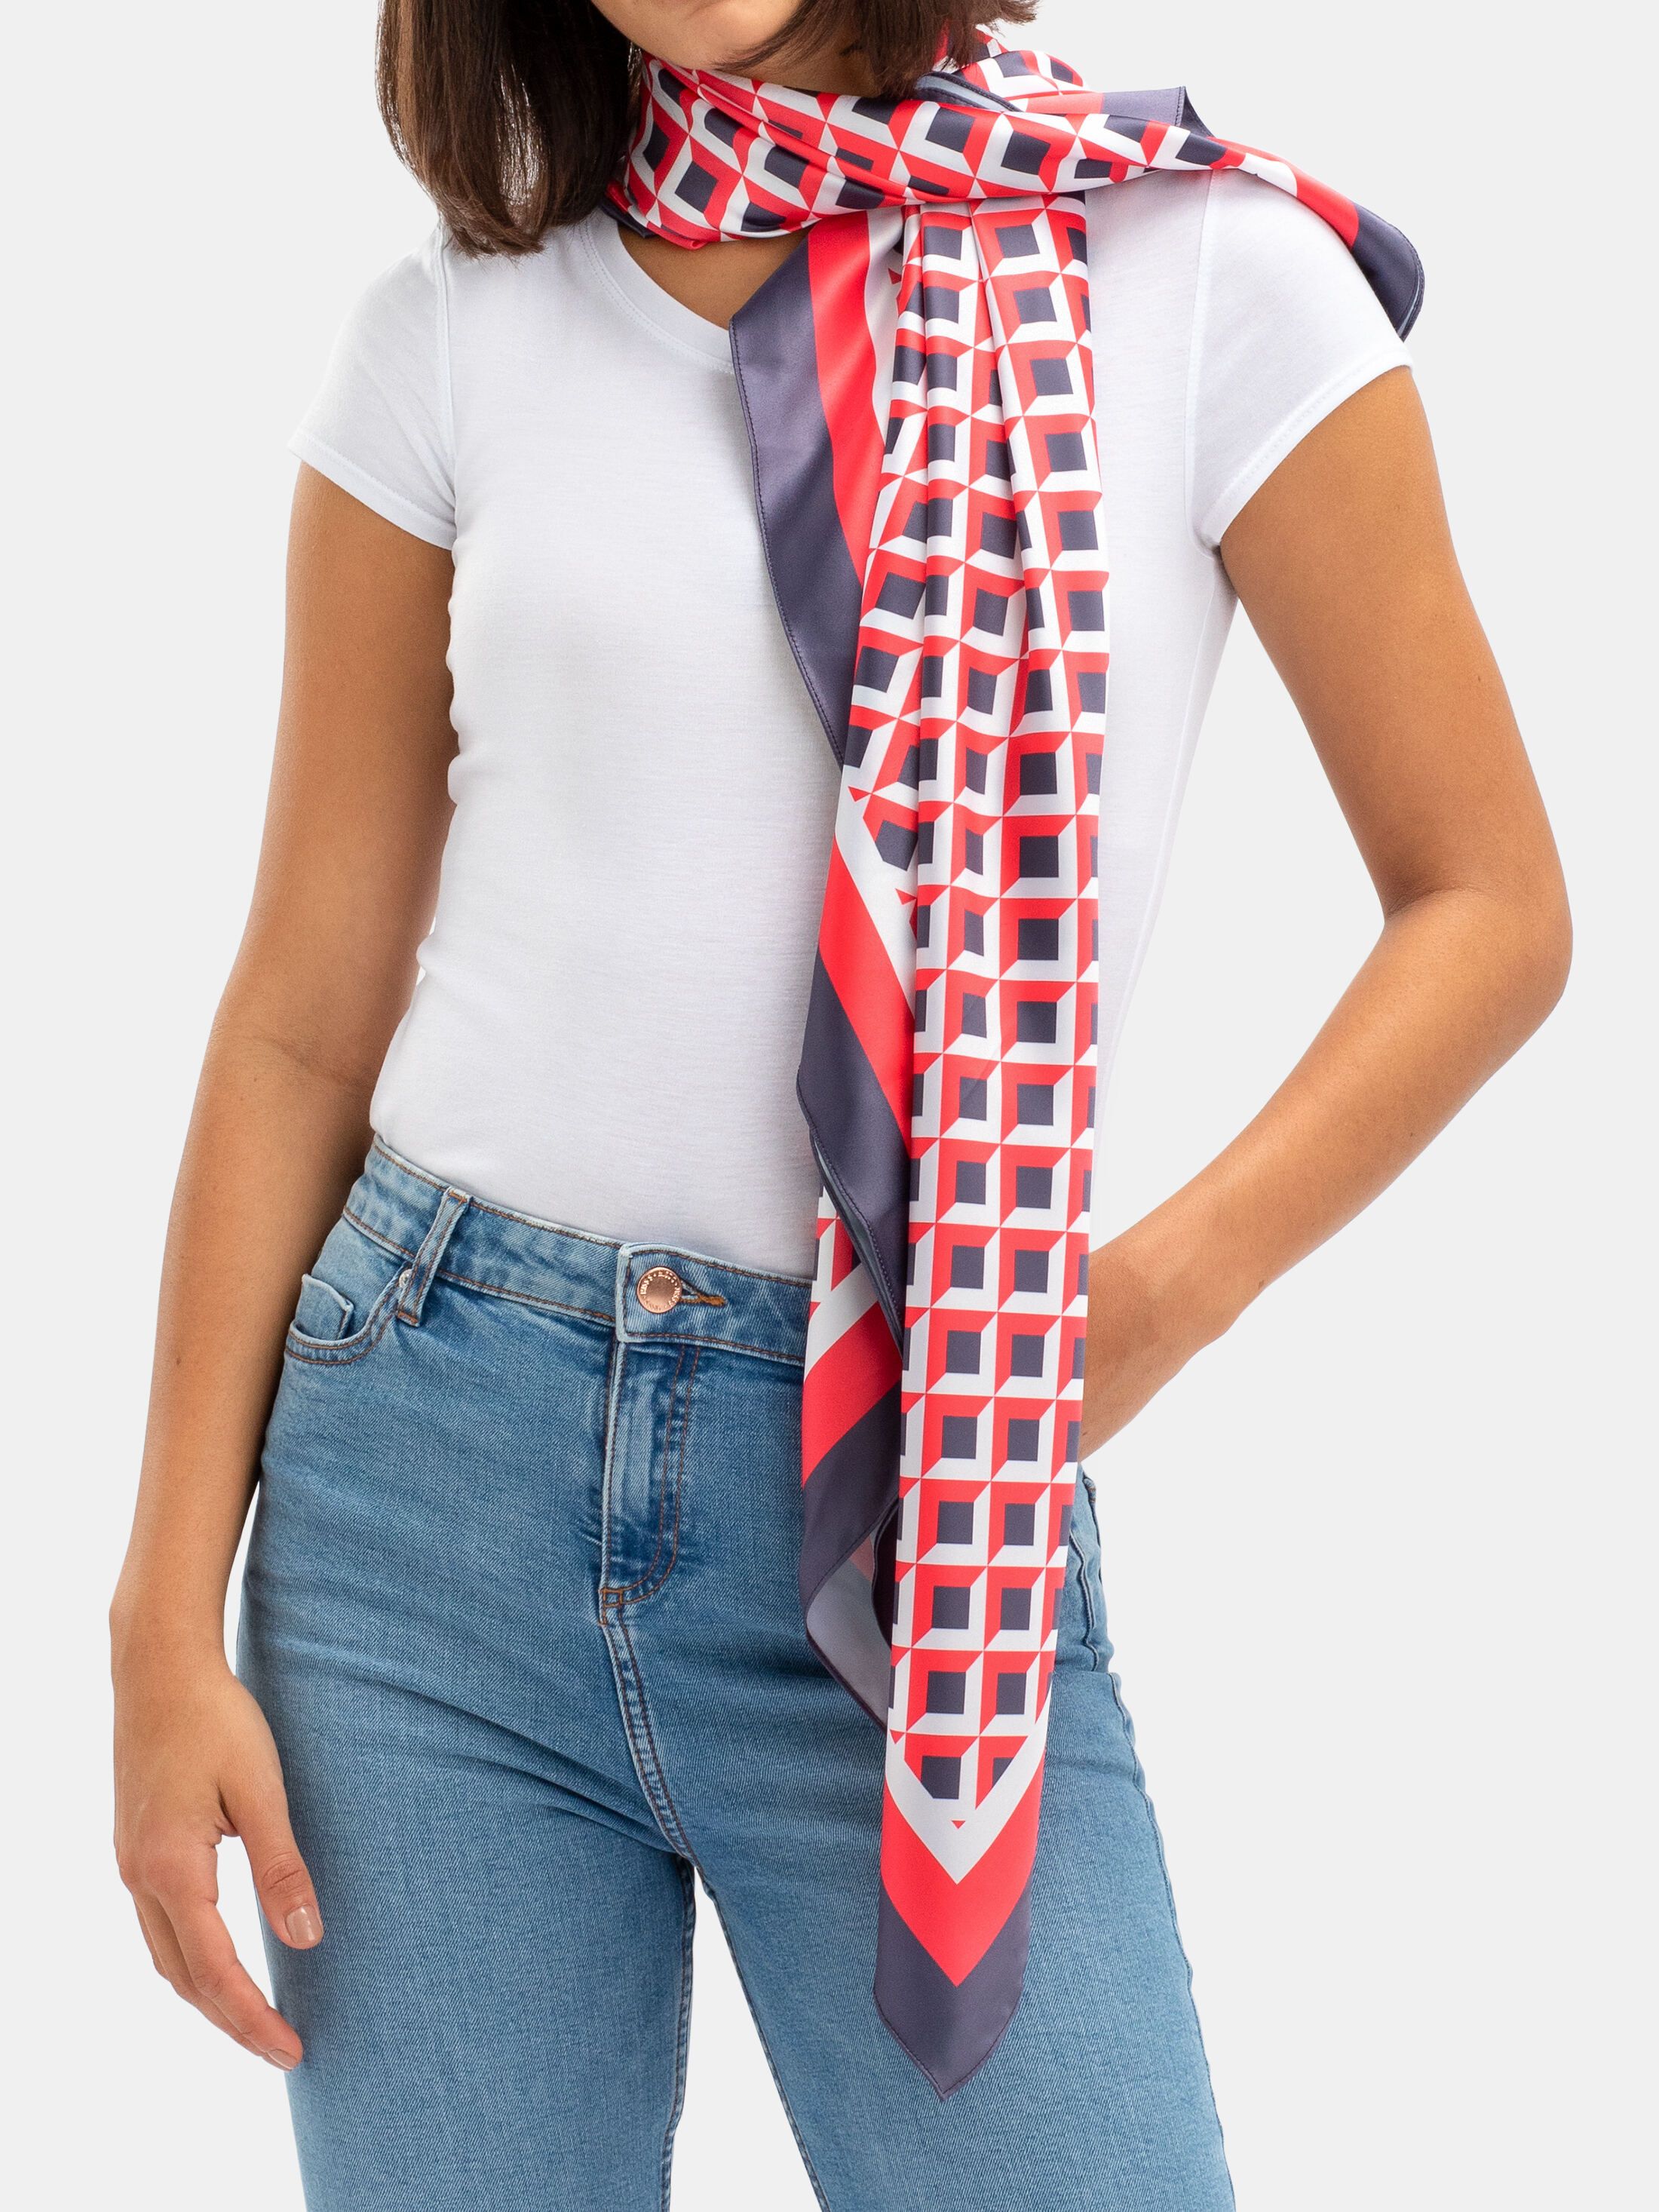 Scarf printer - Digital Fabric Printing Specialists in the UK